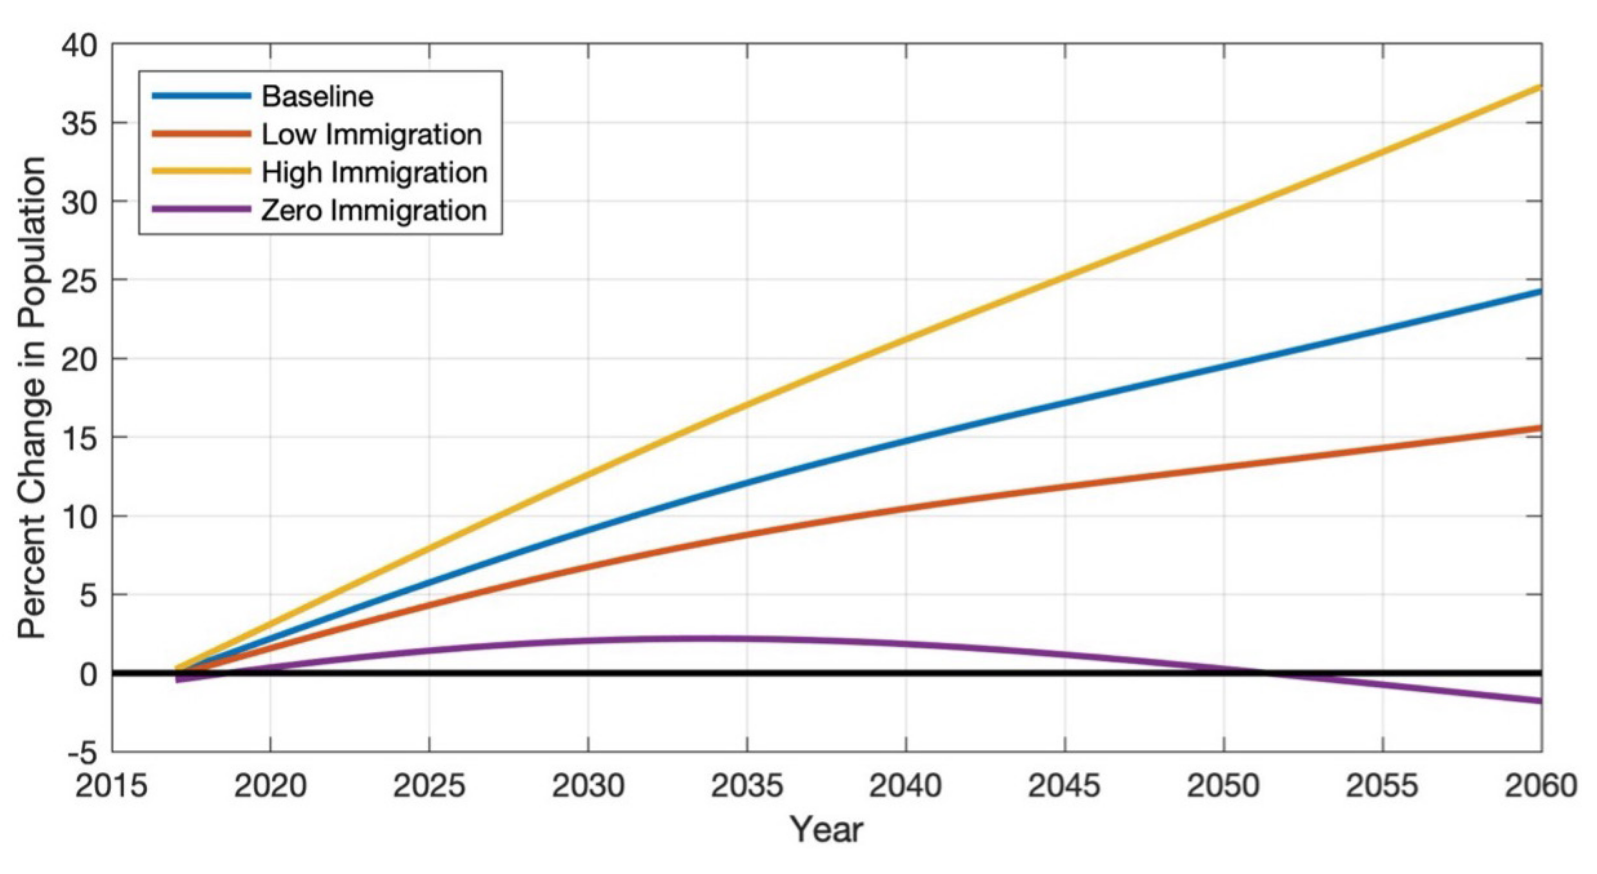 Figure shows projected population growth for zero, low, and high immigartion scenarios